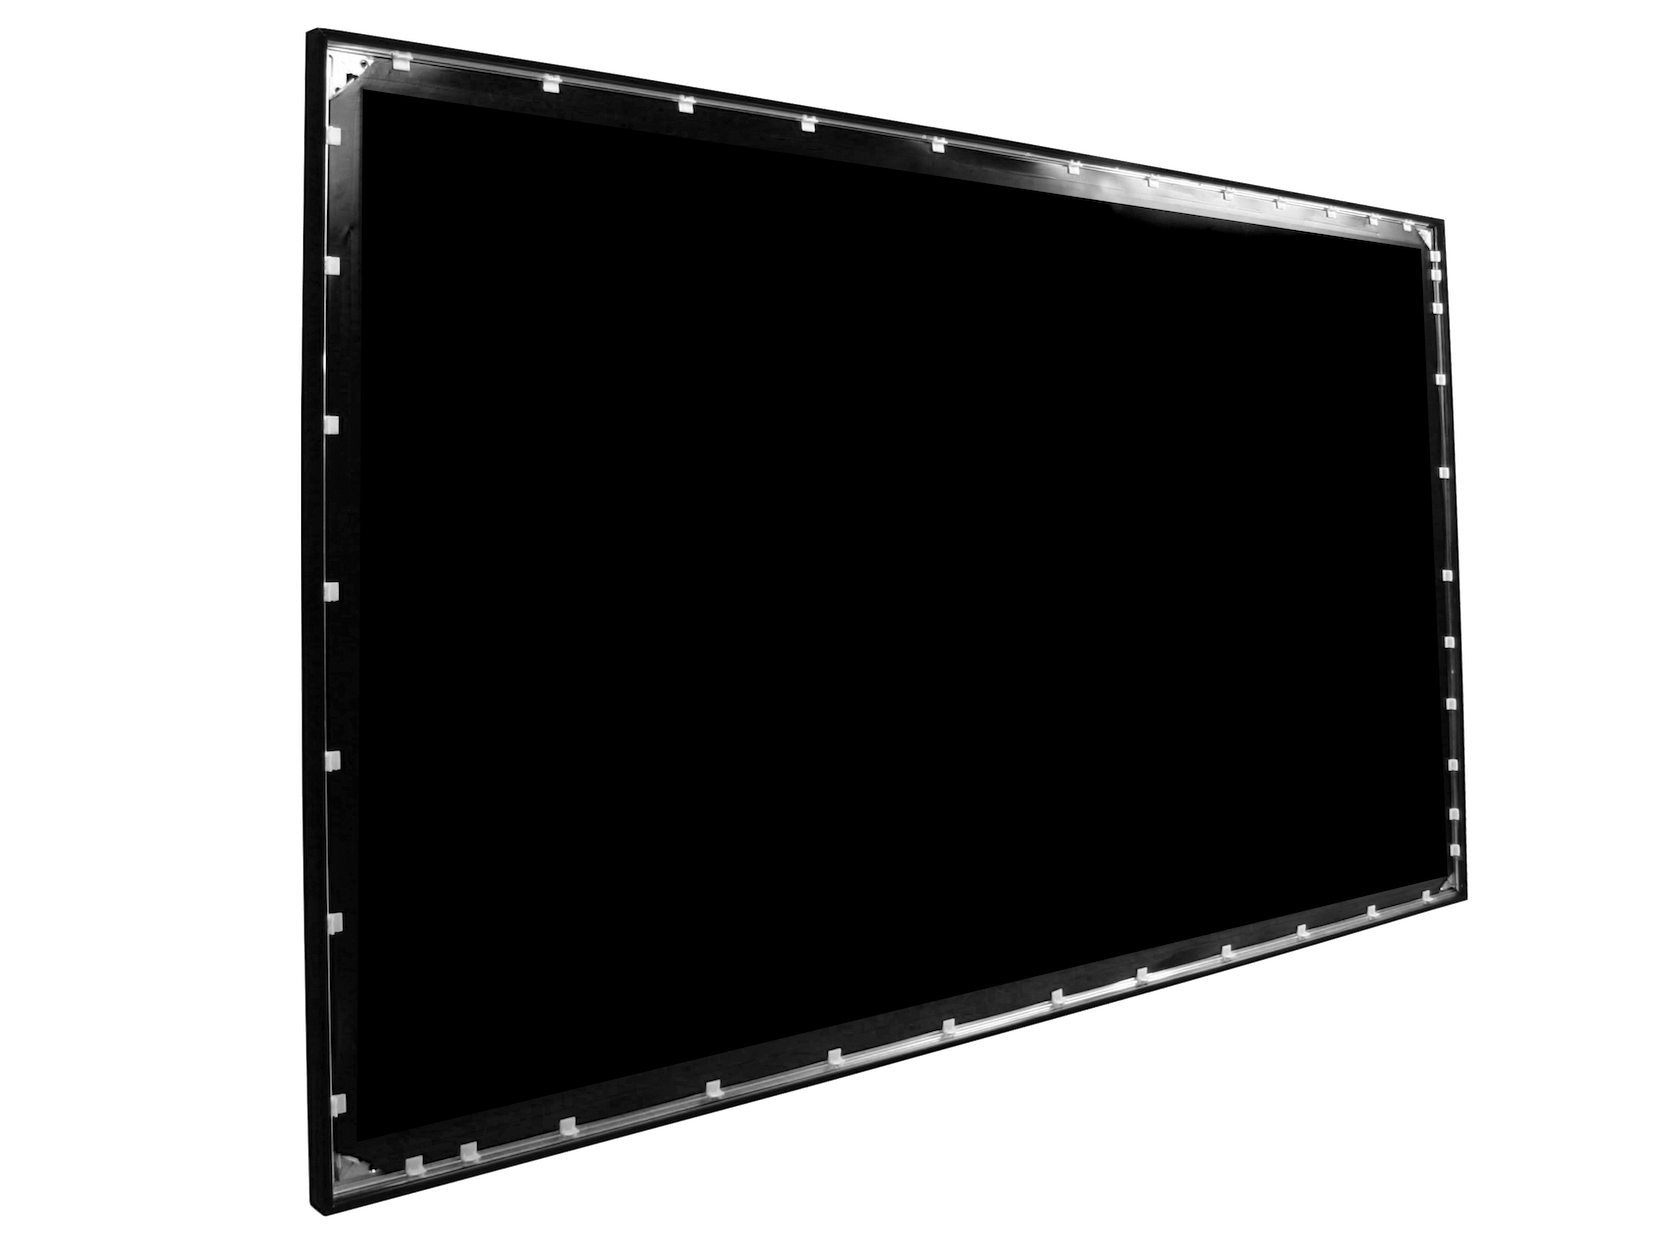 LUNETTE CURVED - FIXED FRAME PROJECTION SCREEN